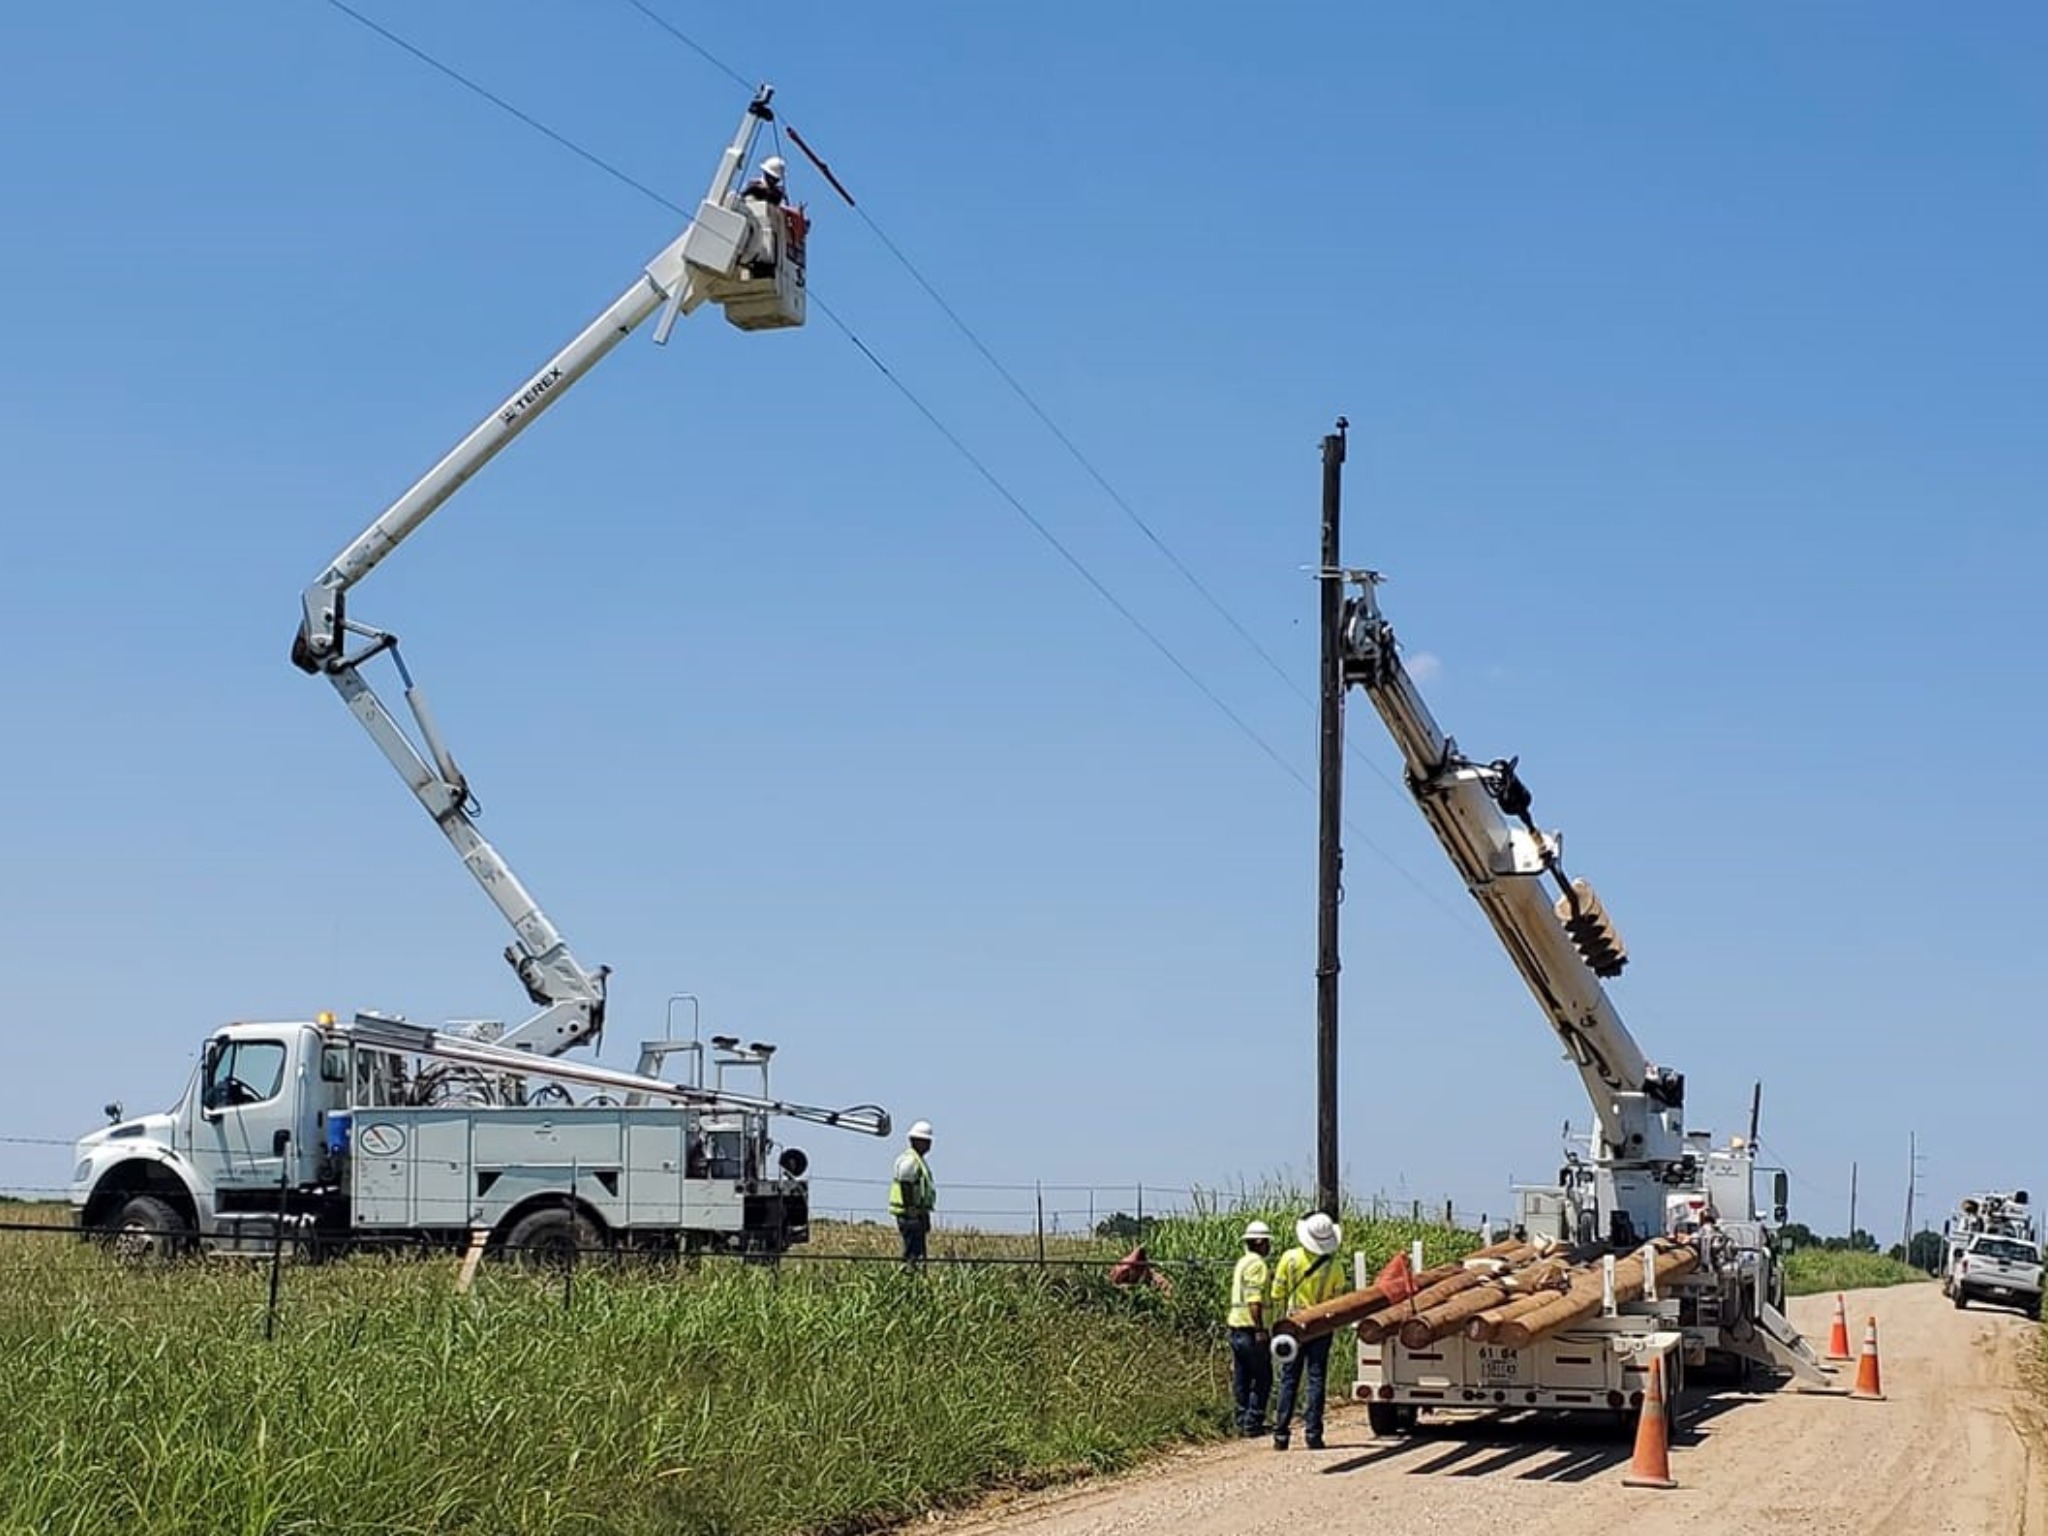 Power Outage Safety Resources  Grand Valley Rural Power Lines, Inc